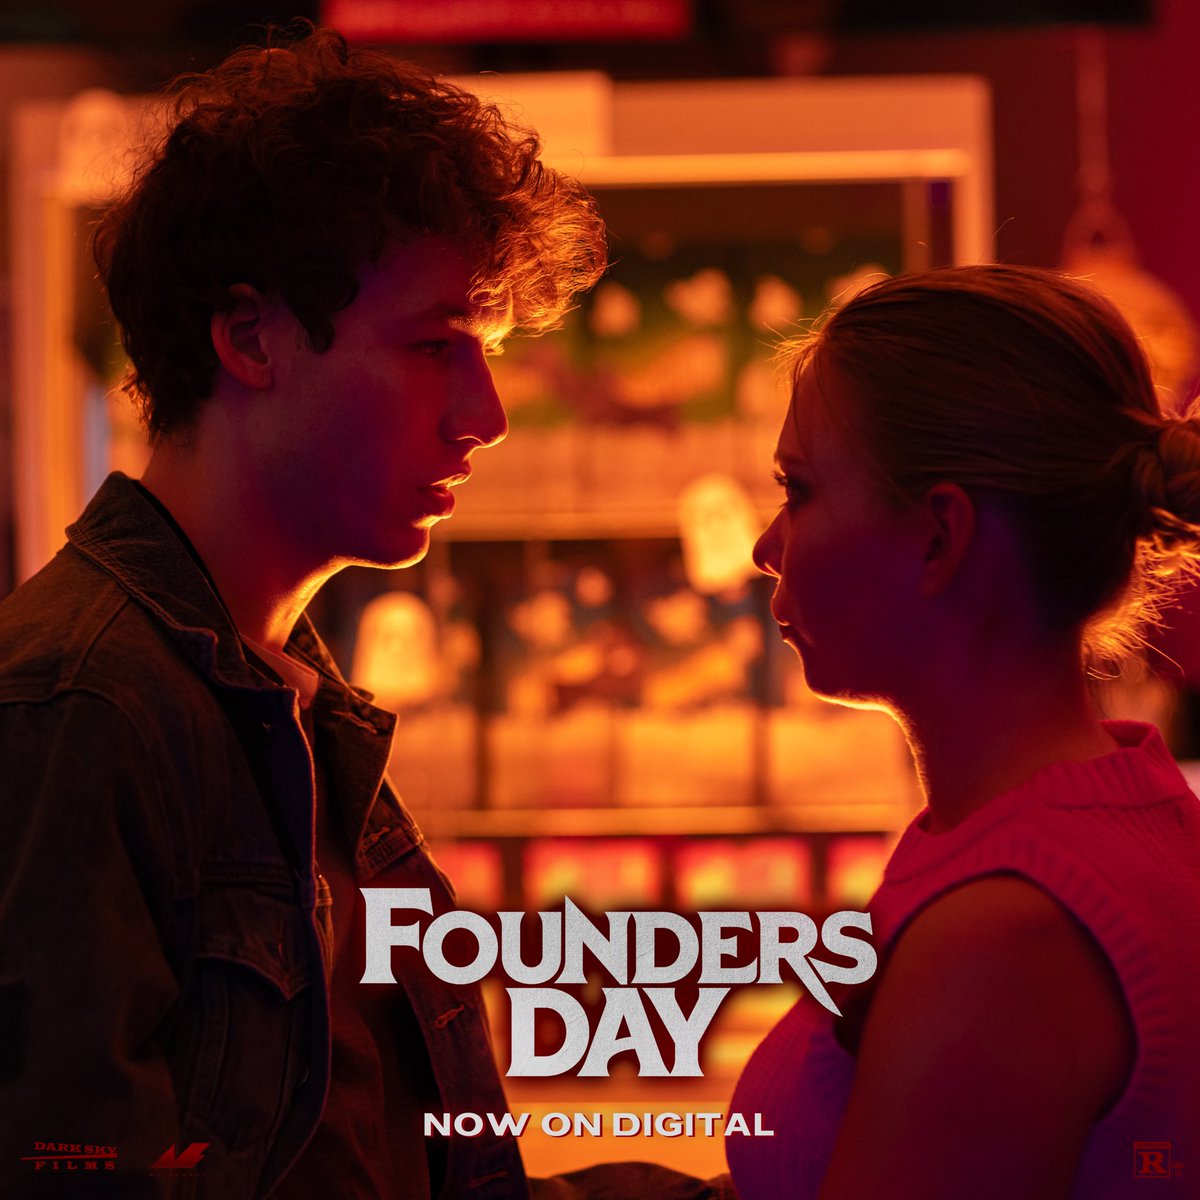 Time to “Netflix” and kill. Grab a date and watch #FoundersDay on @appletv 🍿🔪 @darkskyfilms apple.co/4a4O6vG